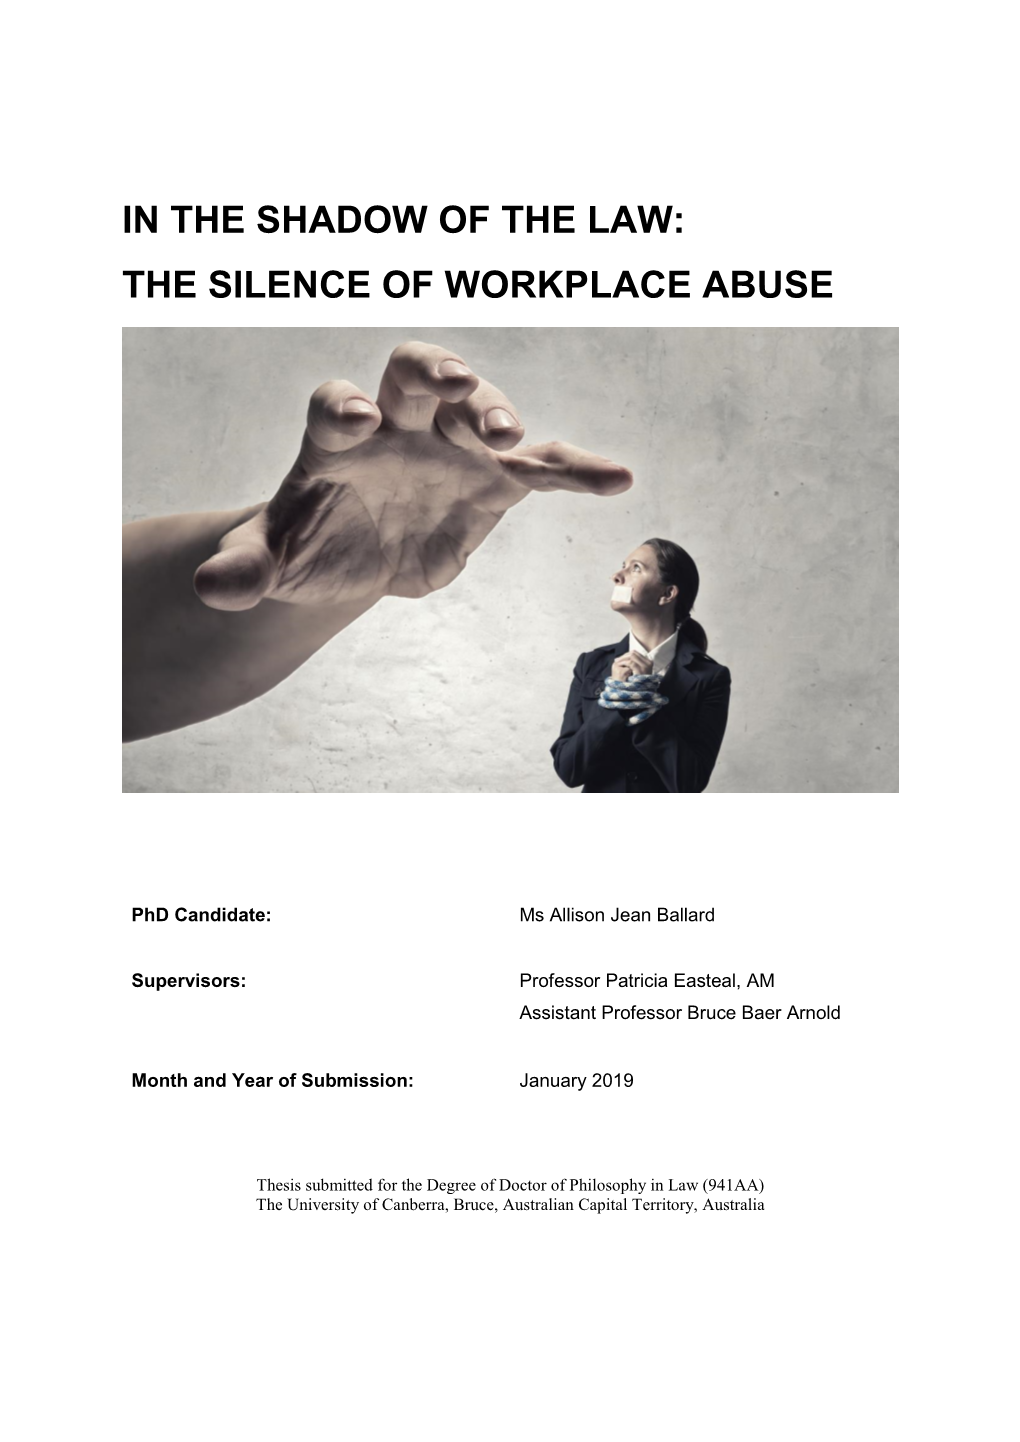 In the Shadow of the Law: the Silence of Workplace Abuse